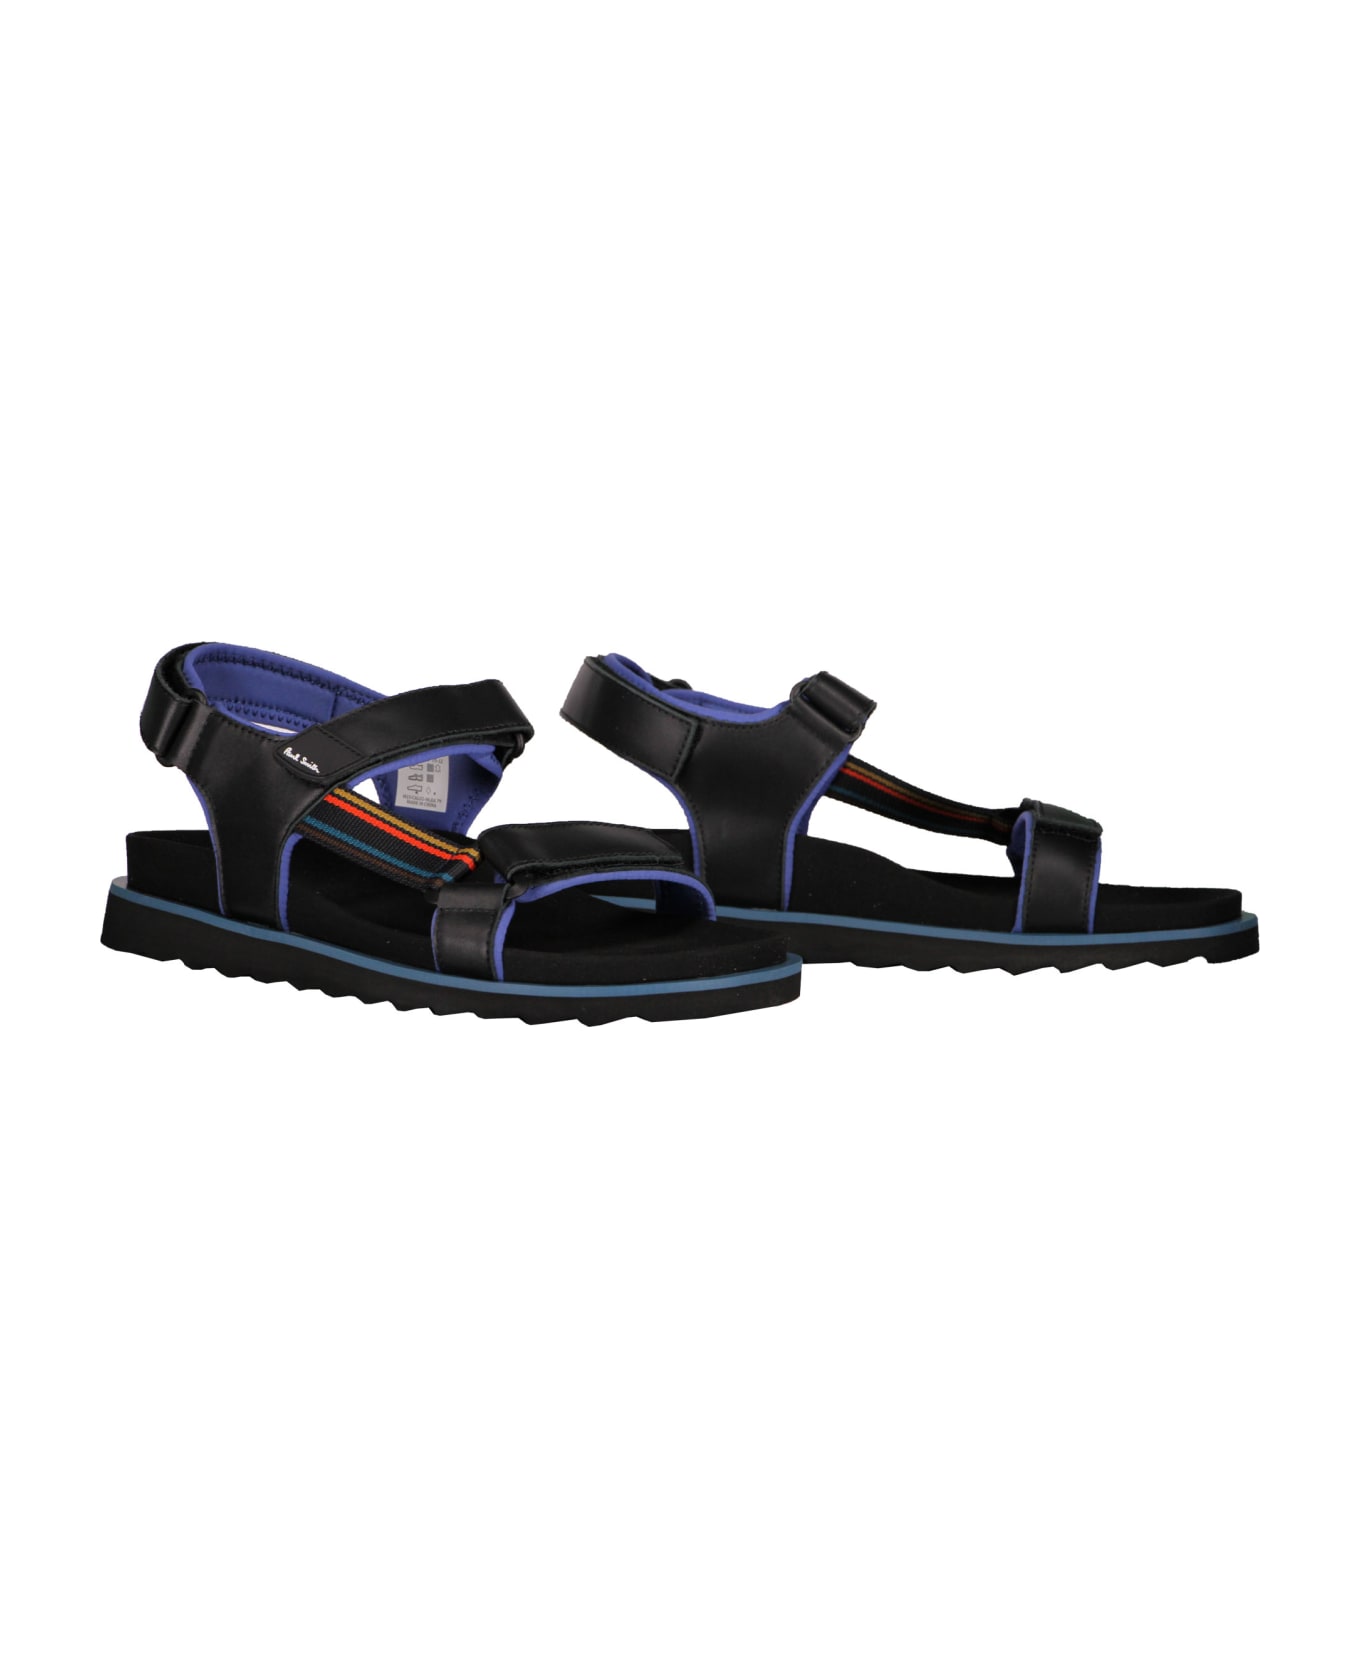 Paul Smith Flat Sandals - black その他各種シューズ